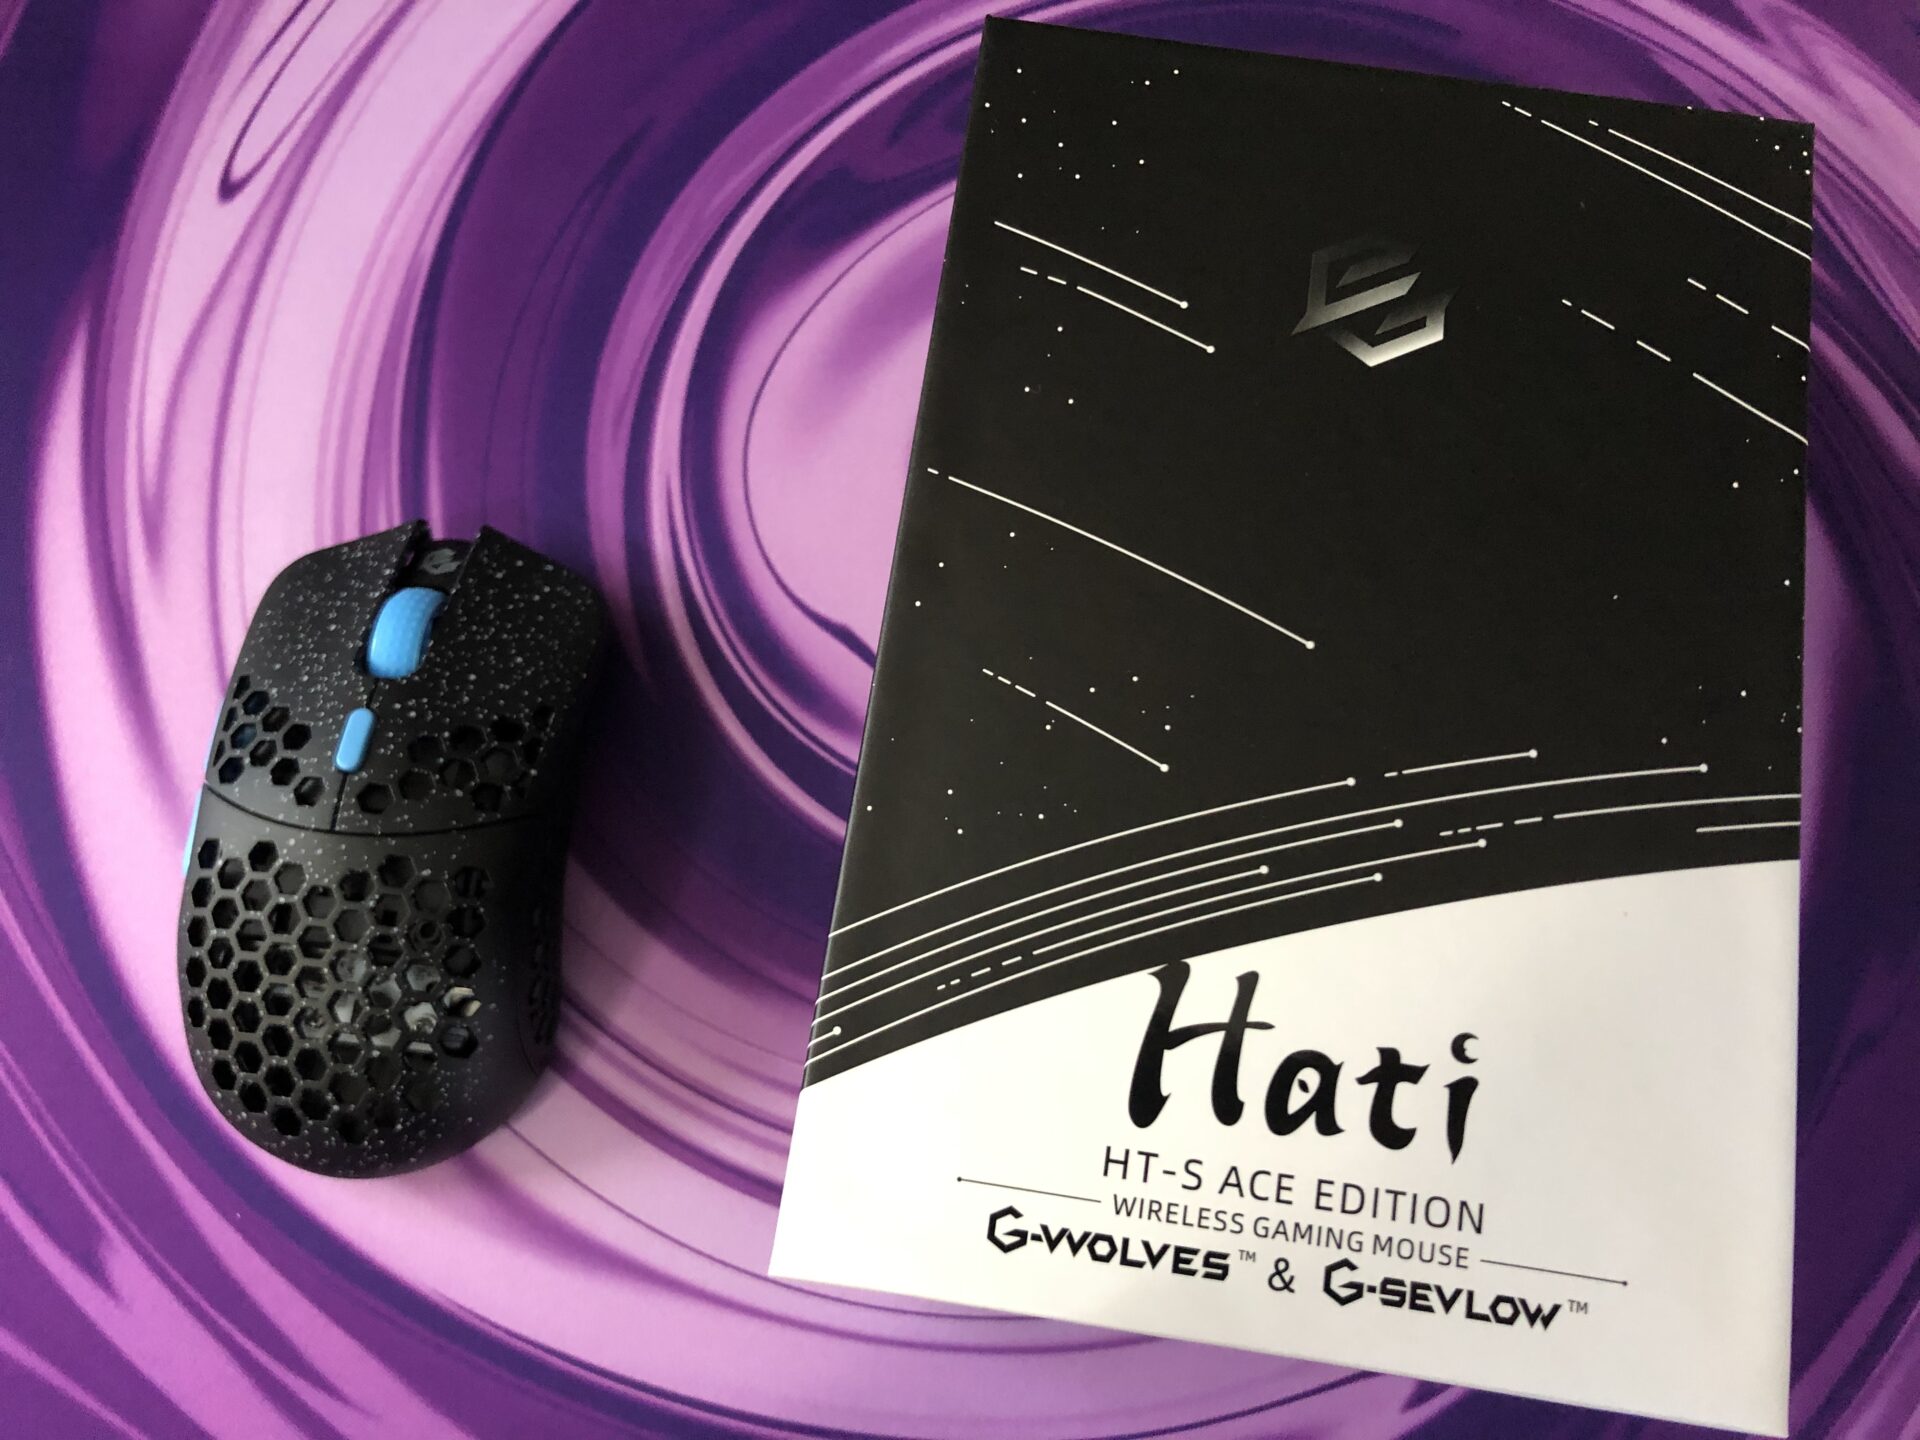 G-wolves hati s wireless ace edition